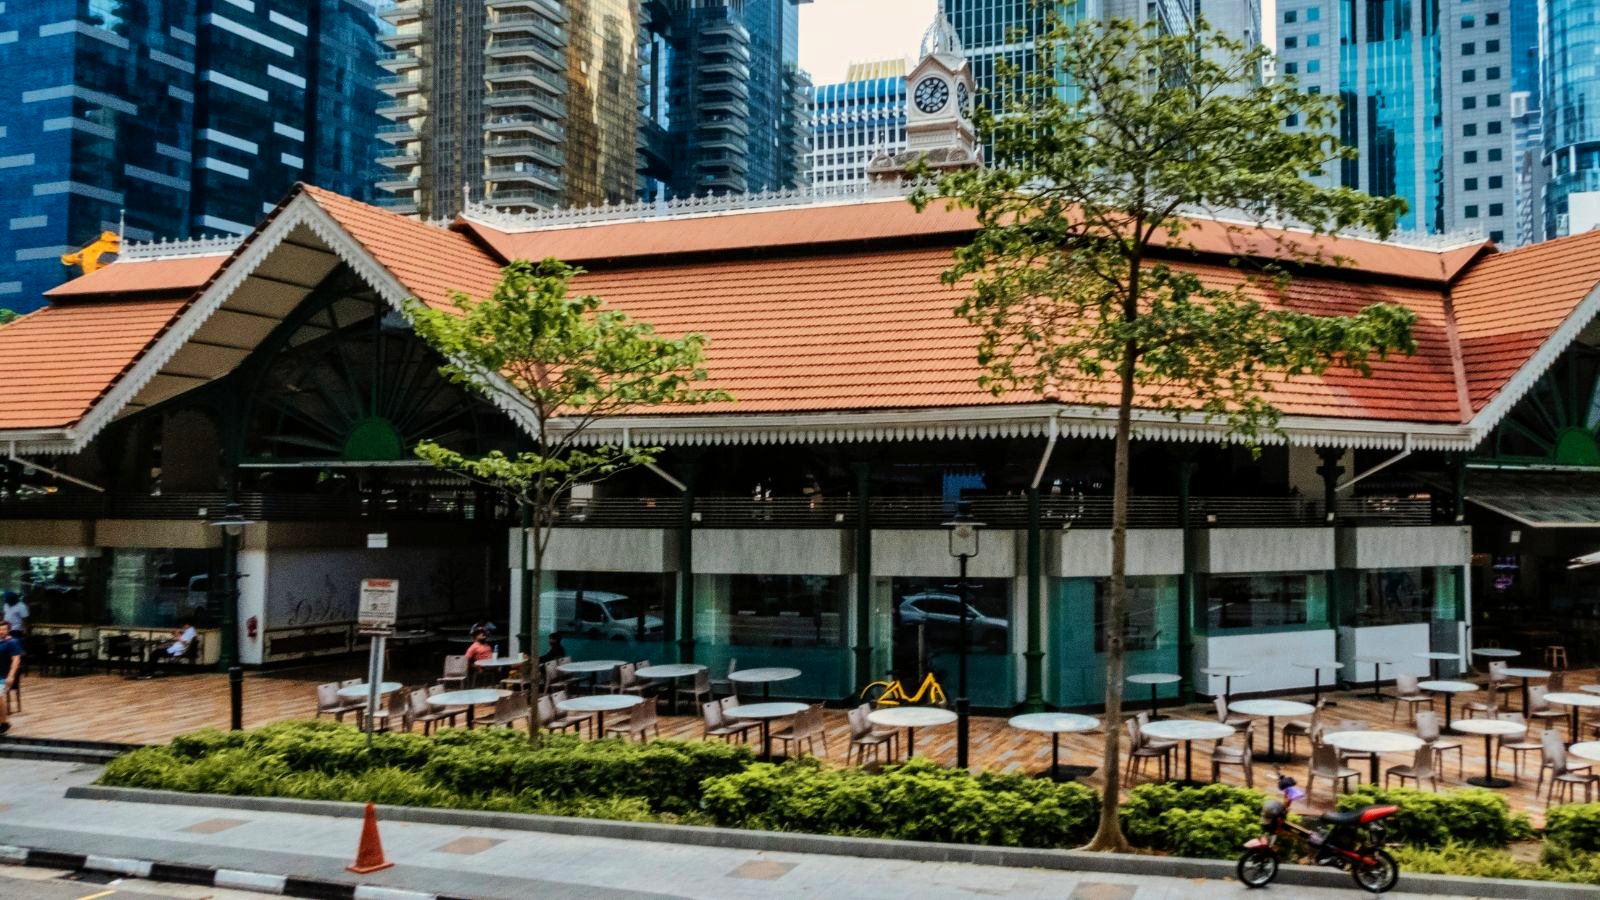 Indonesia to build food centre inspired by Singapore's Lau Pa Sat